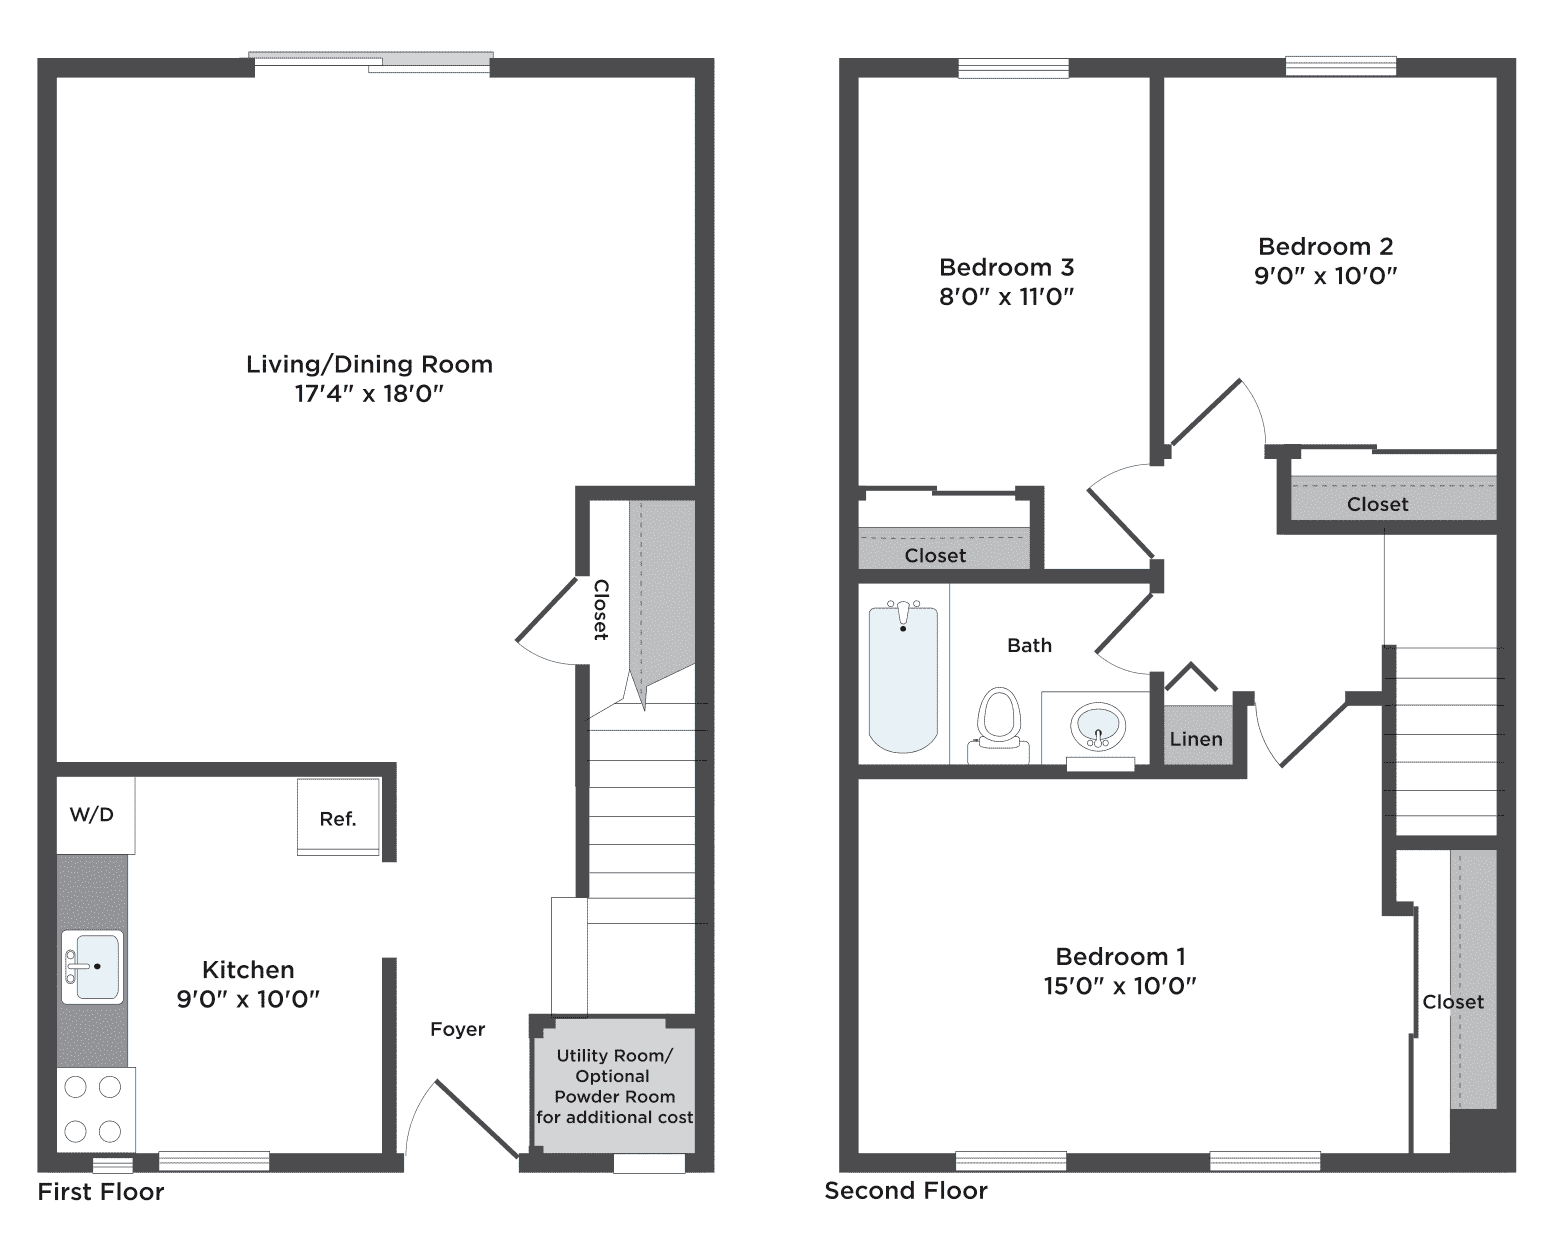 Three bedroom townhome Floorplan. Entrance opens to foyer with utility room on the right that can be converted to powder room for optional cost and kitchen with washer/dryer on the left. The open living/dining room area has a closet. Upstairs has a full bath, linen closet and the three bedrooms, each with it's own built-in closet.